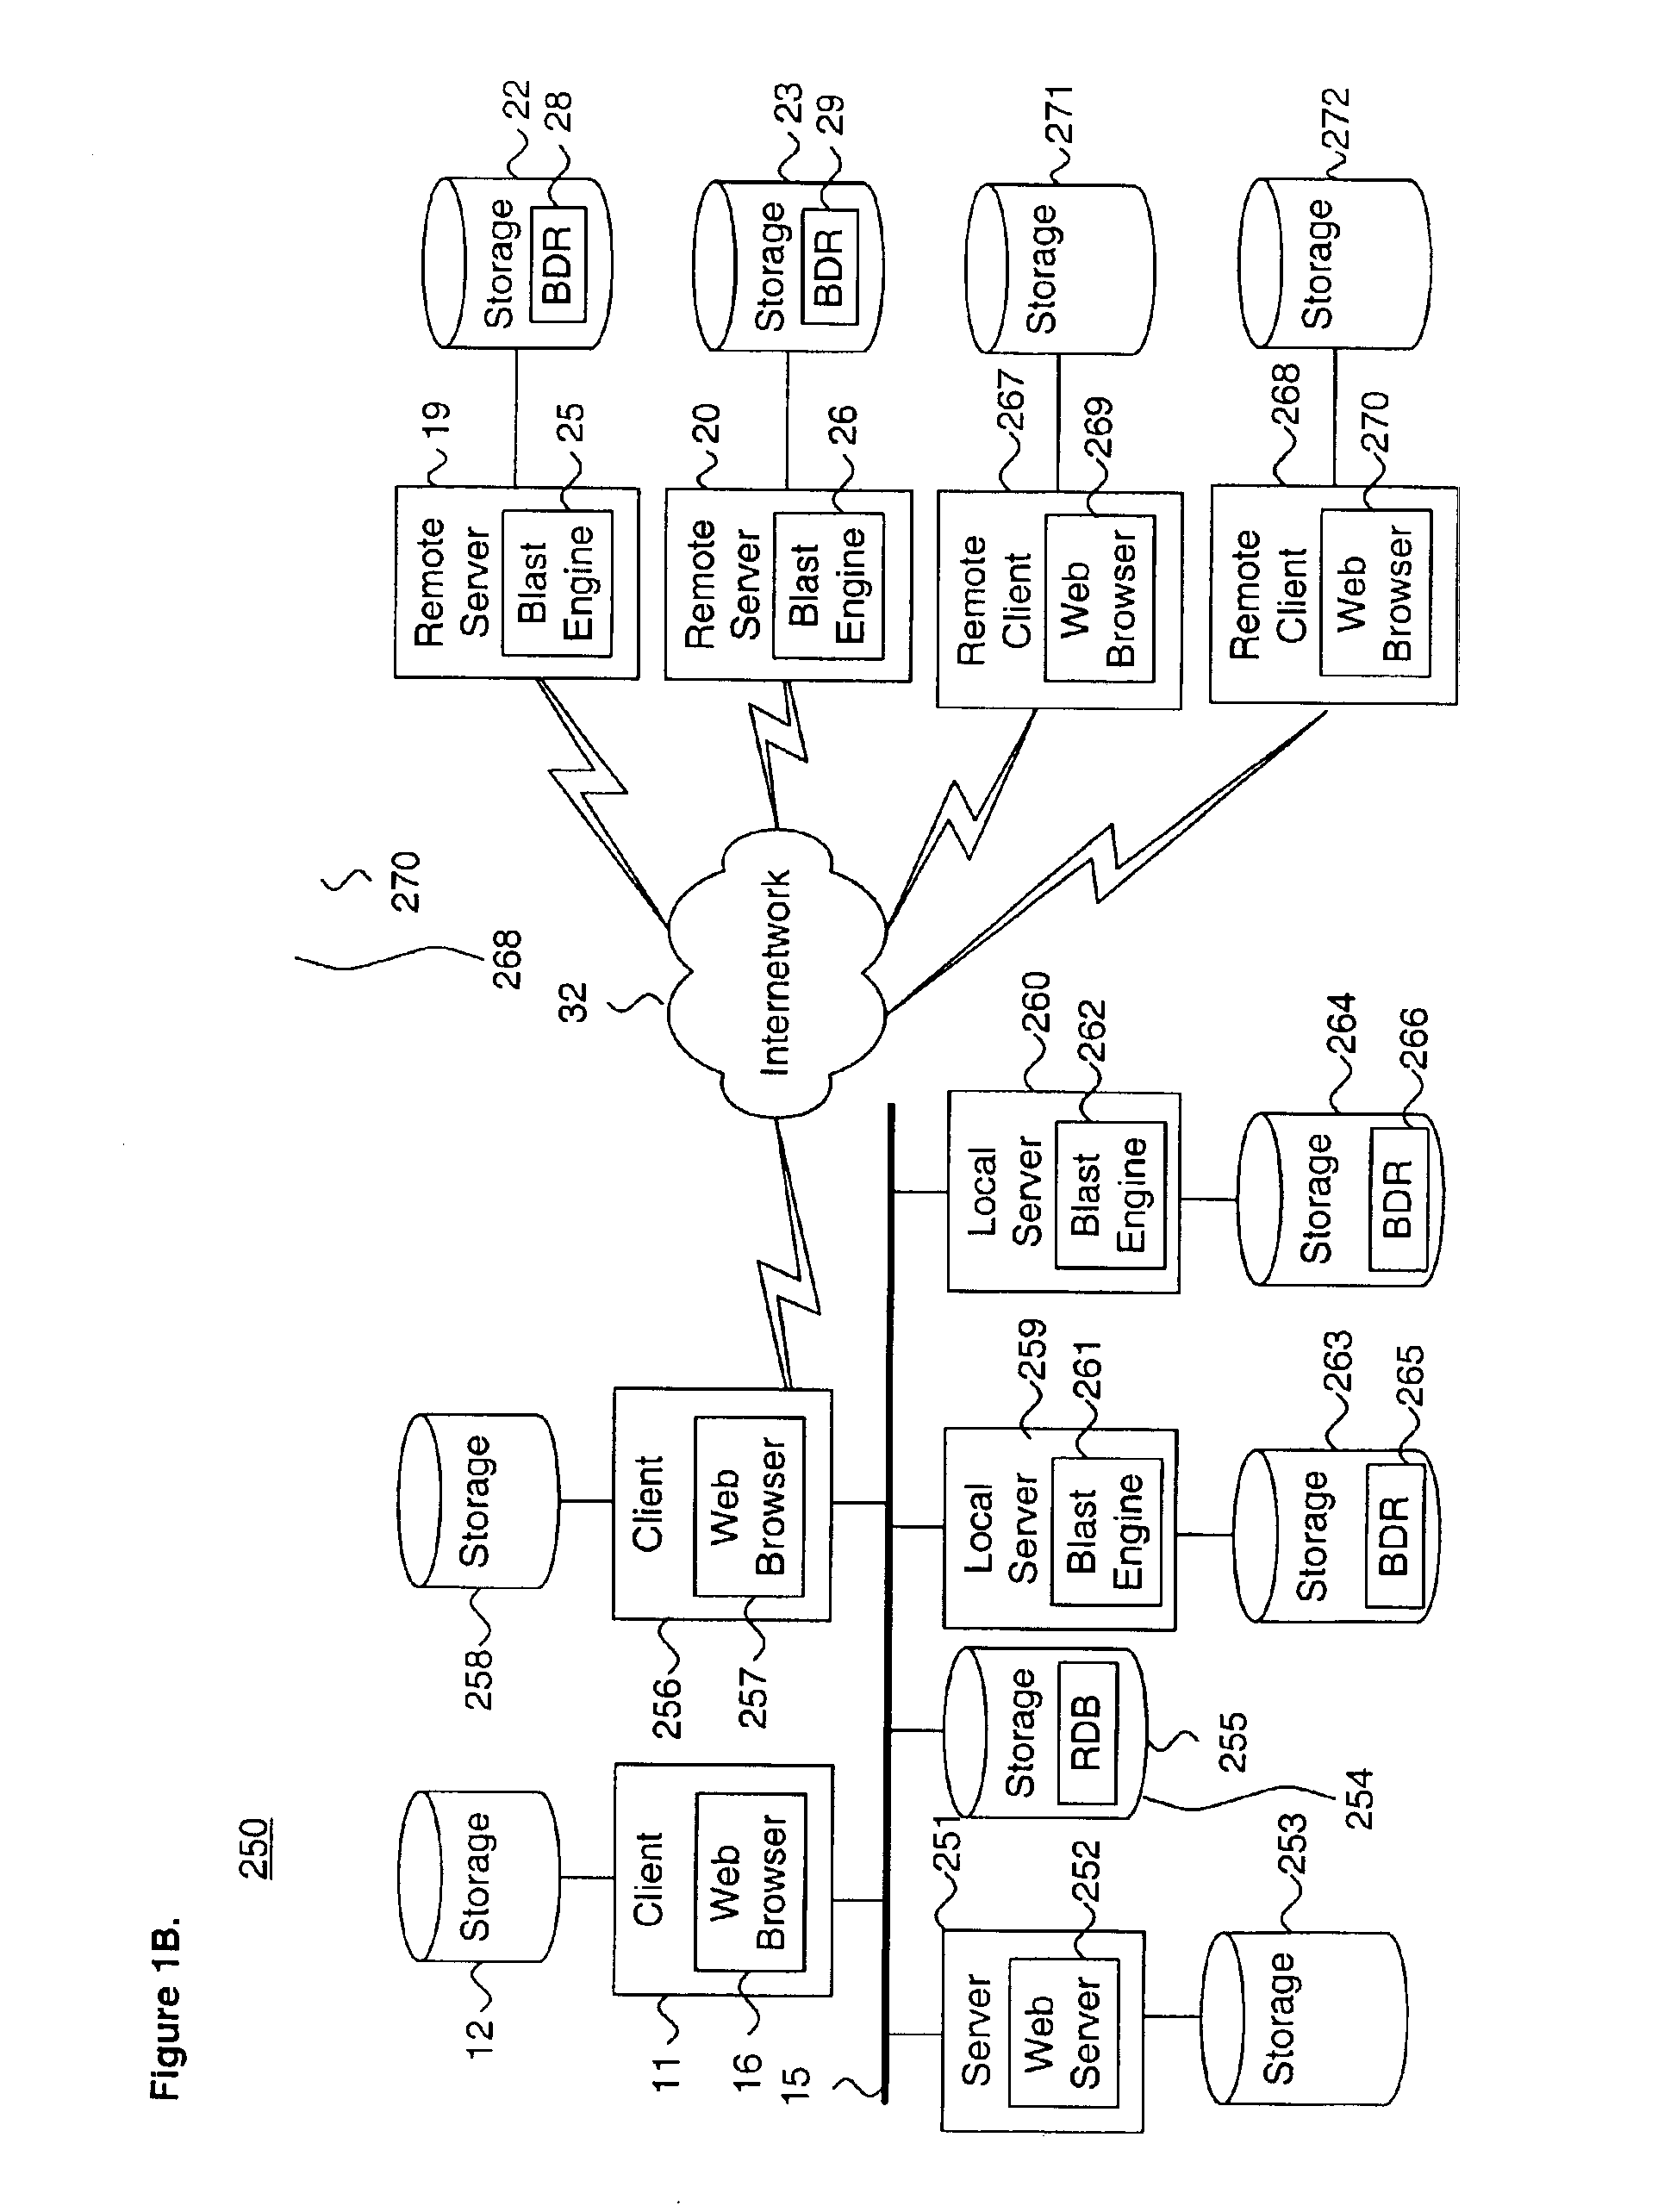 System and method for transacting and manipulating a multi-sequence search using biological data repositories